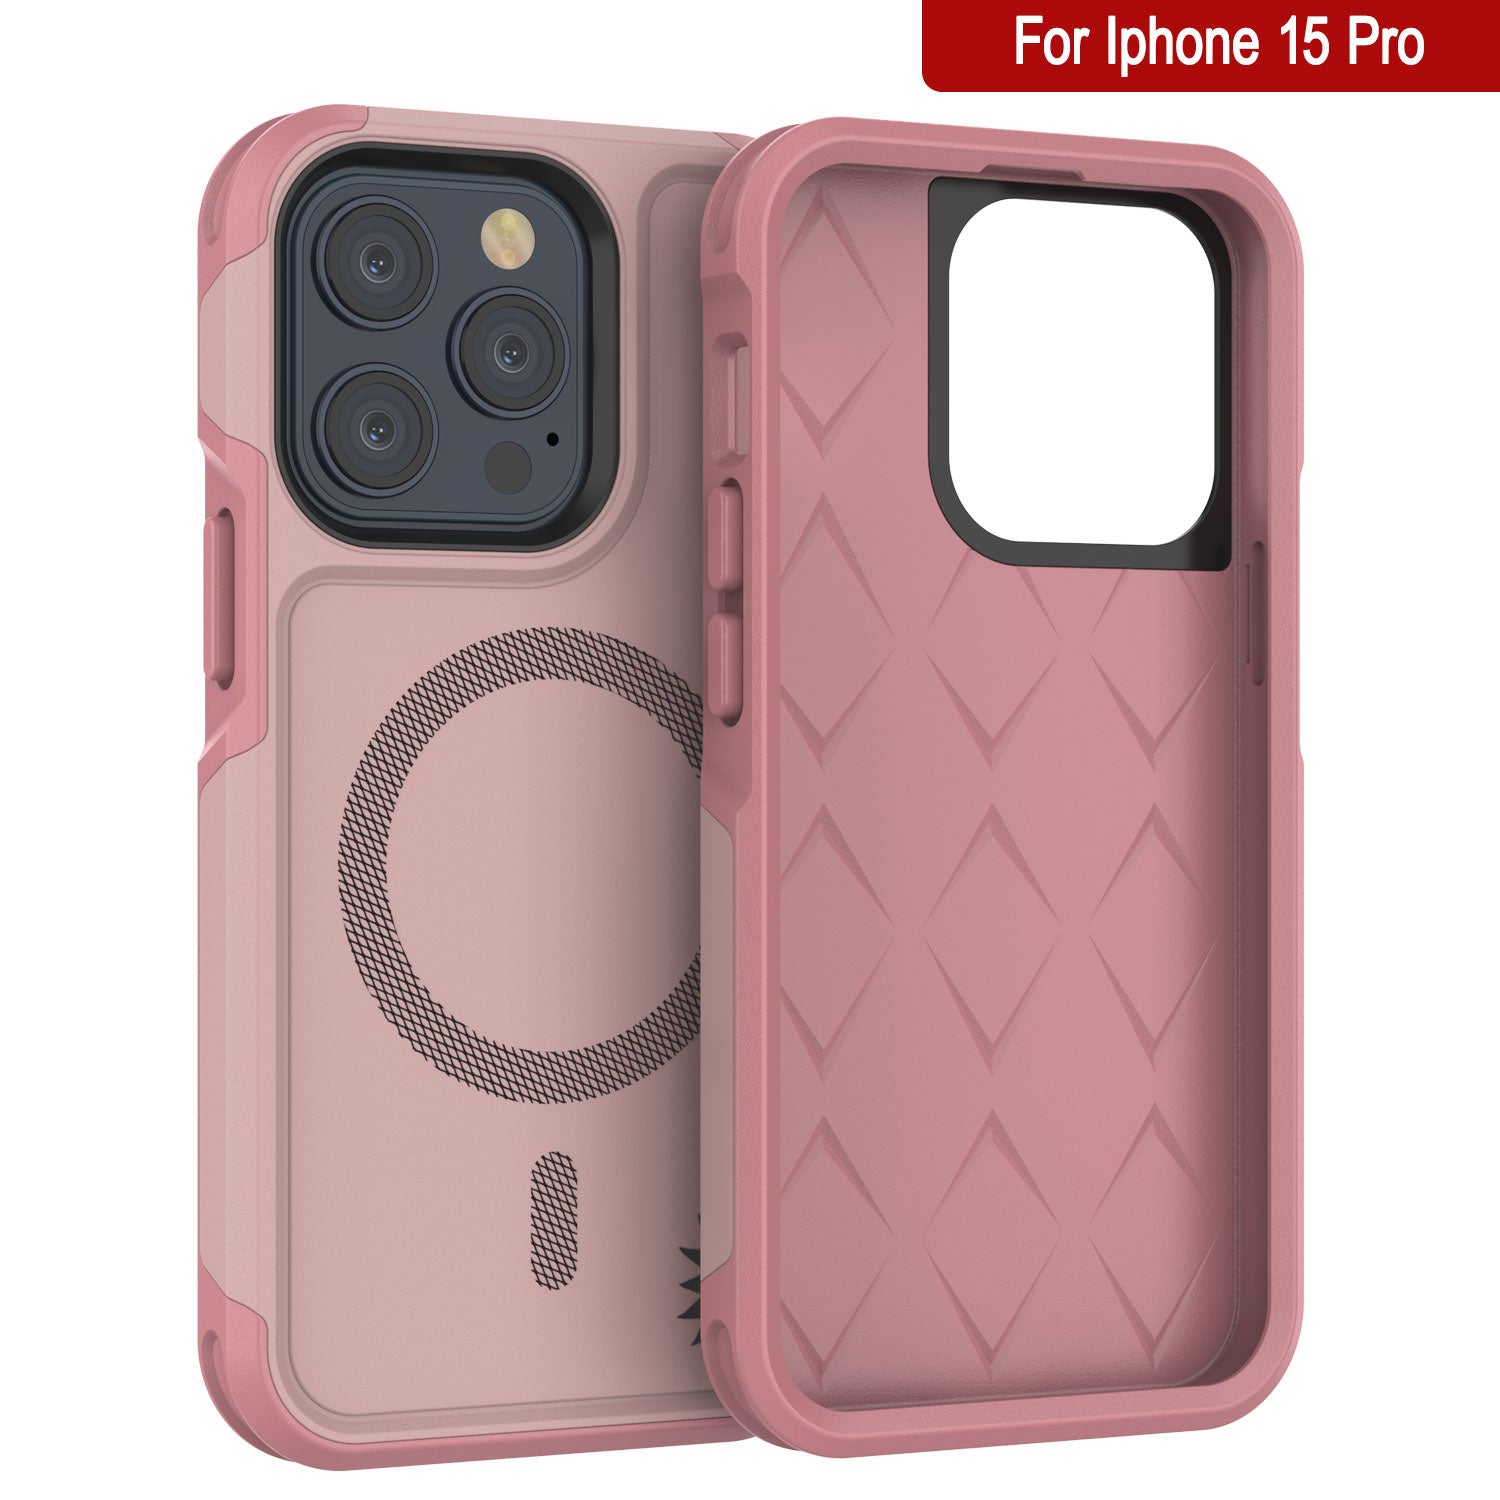 PunkCase iPhone 15 Pro Case, [Spartan 2.0 Series] Clear Rugged Heavy Duty Cover W/Built in Screen Protector [pink]